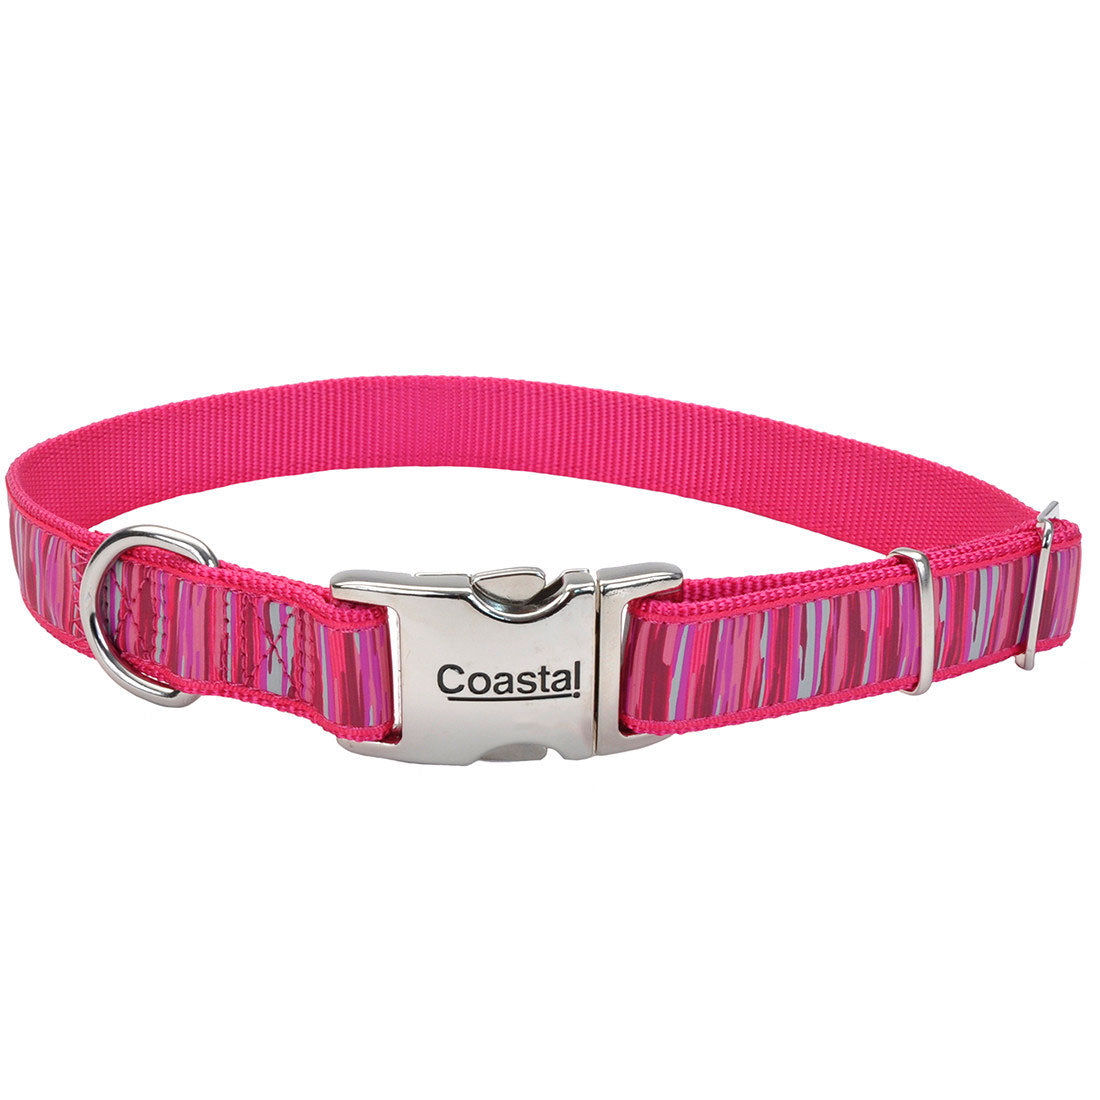 Coastal Ribbon Adjustable Dog Collar with Metal Clip Red Paw S/M